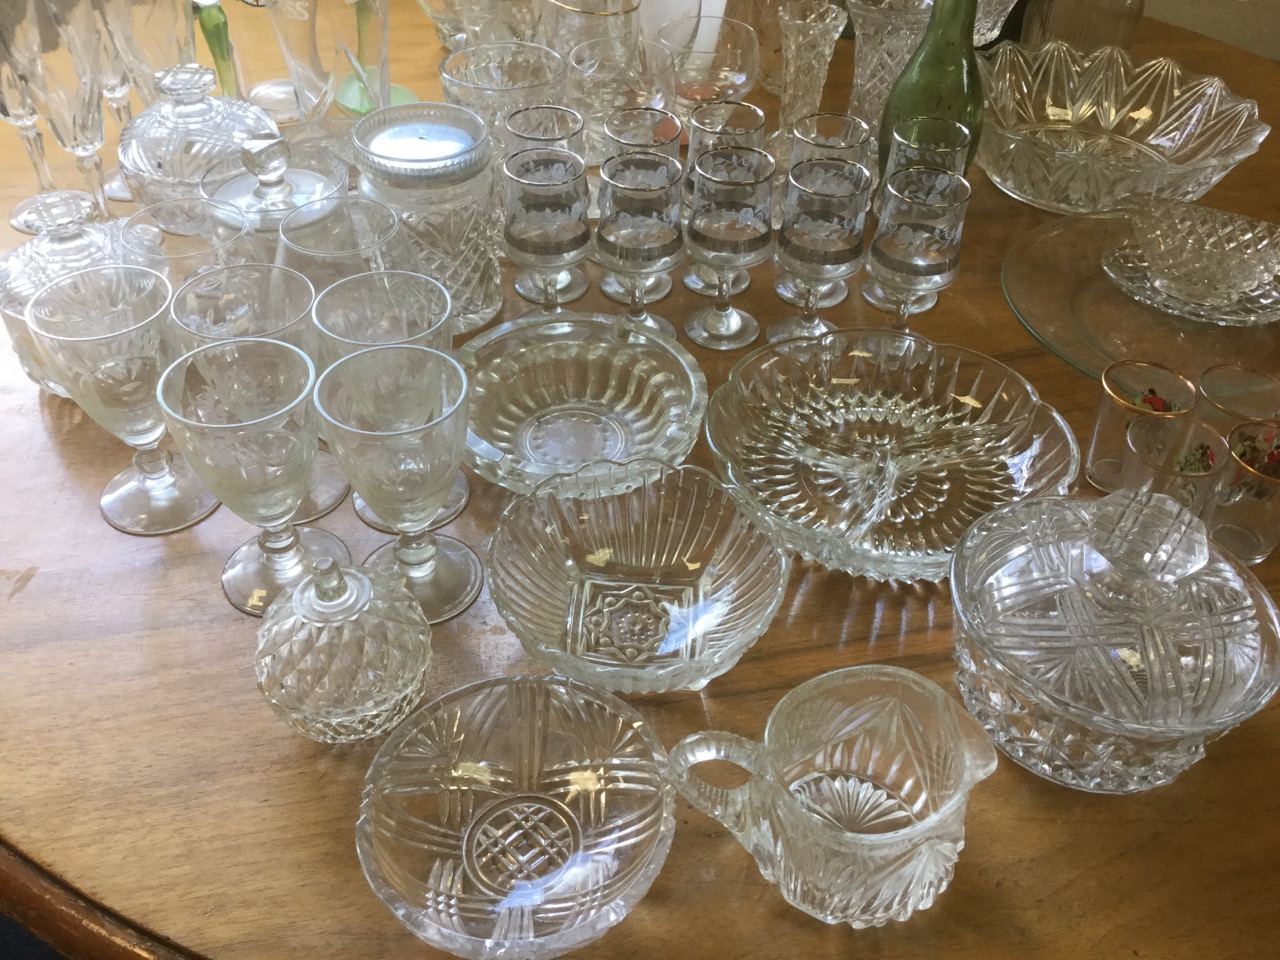 Miscellaneous glass including an Alnwick Brewery bottle, sets of glasses, fruit bowls, a - Image 6 of 6